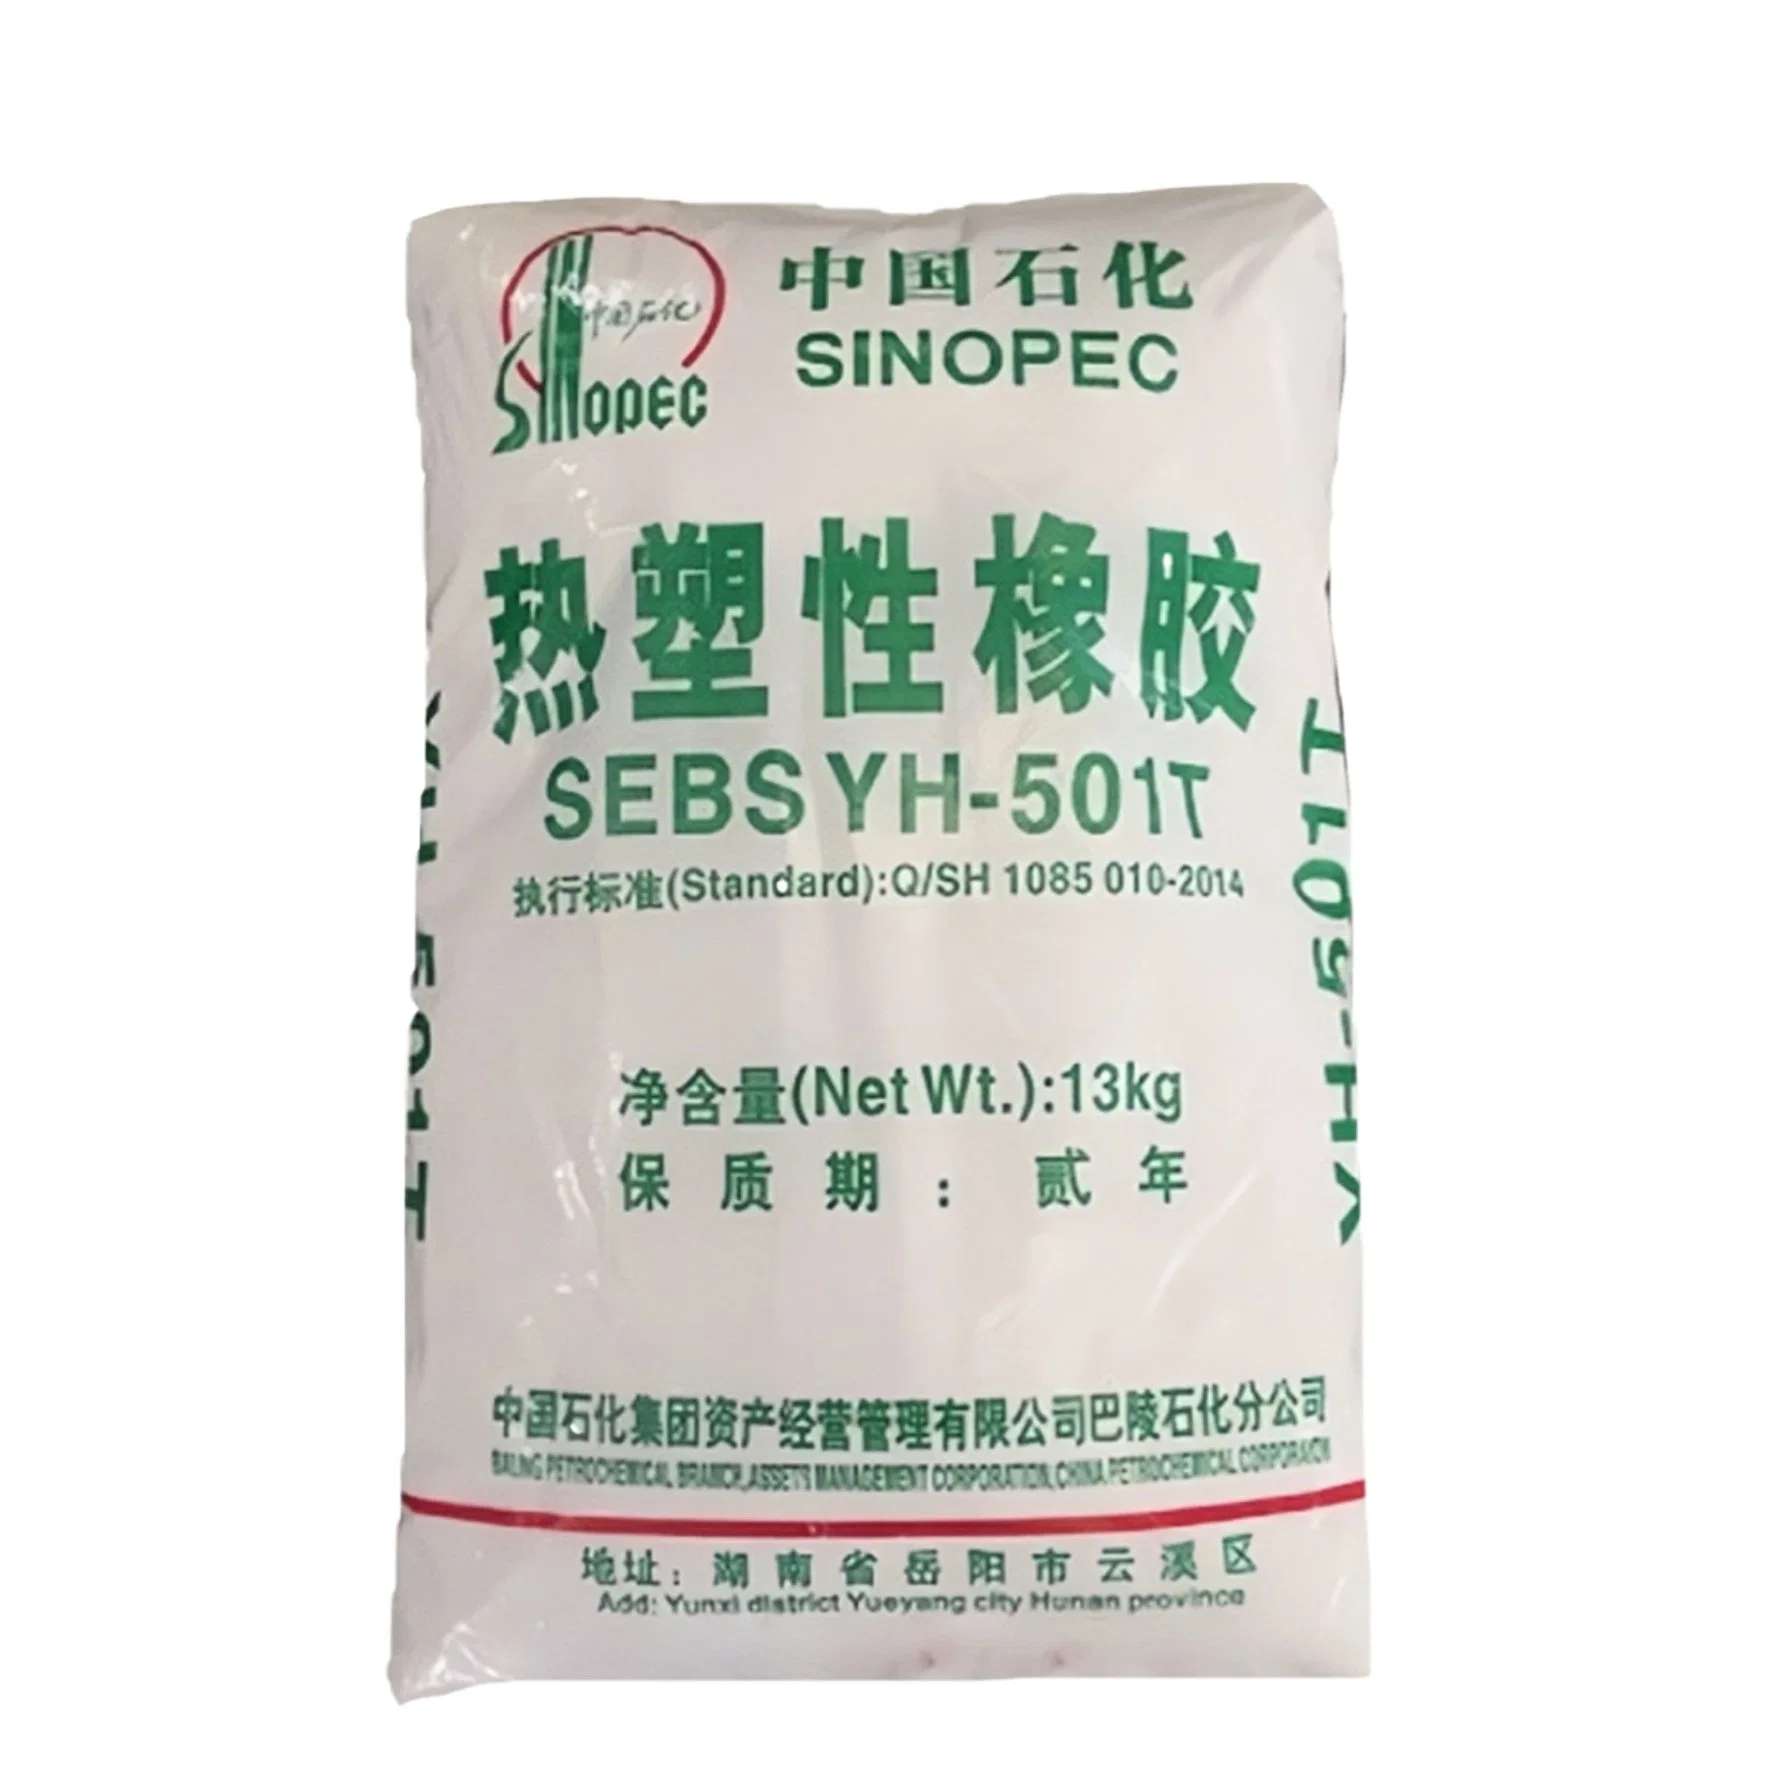 Sinopec Baling Thermoplastic Rubber SEBS Yh-501t